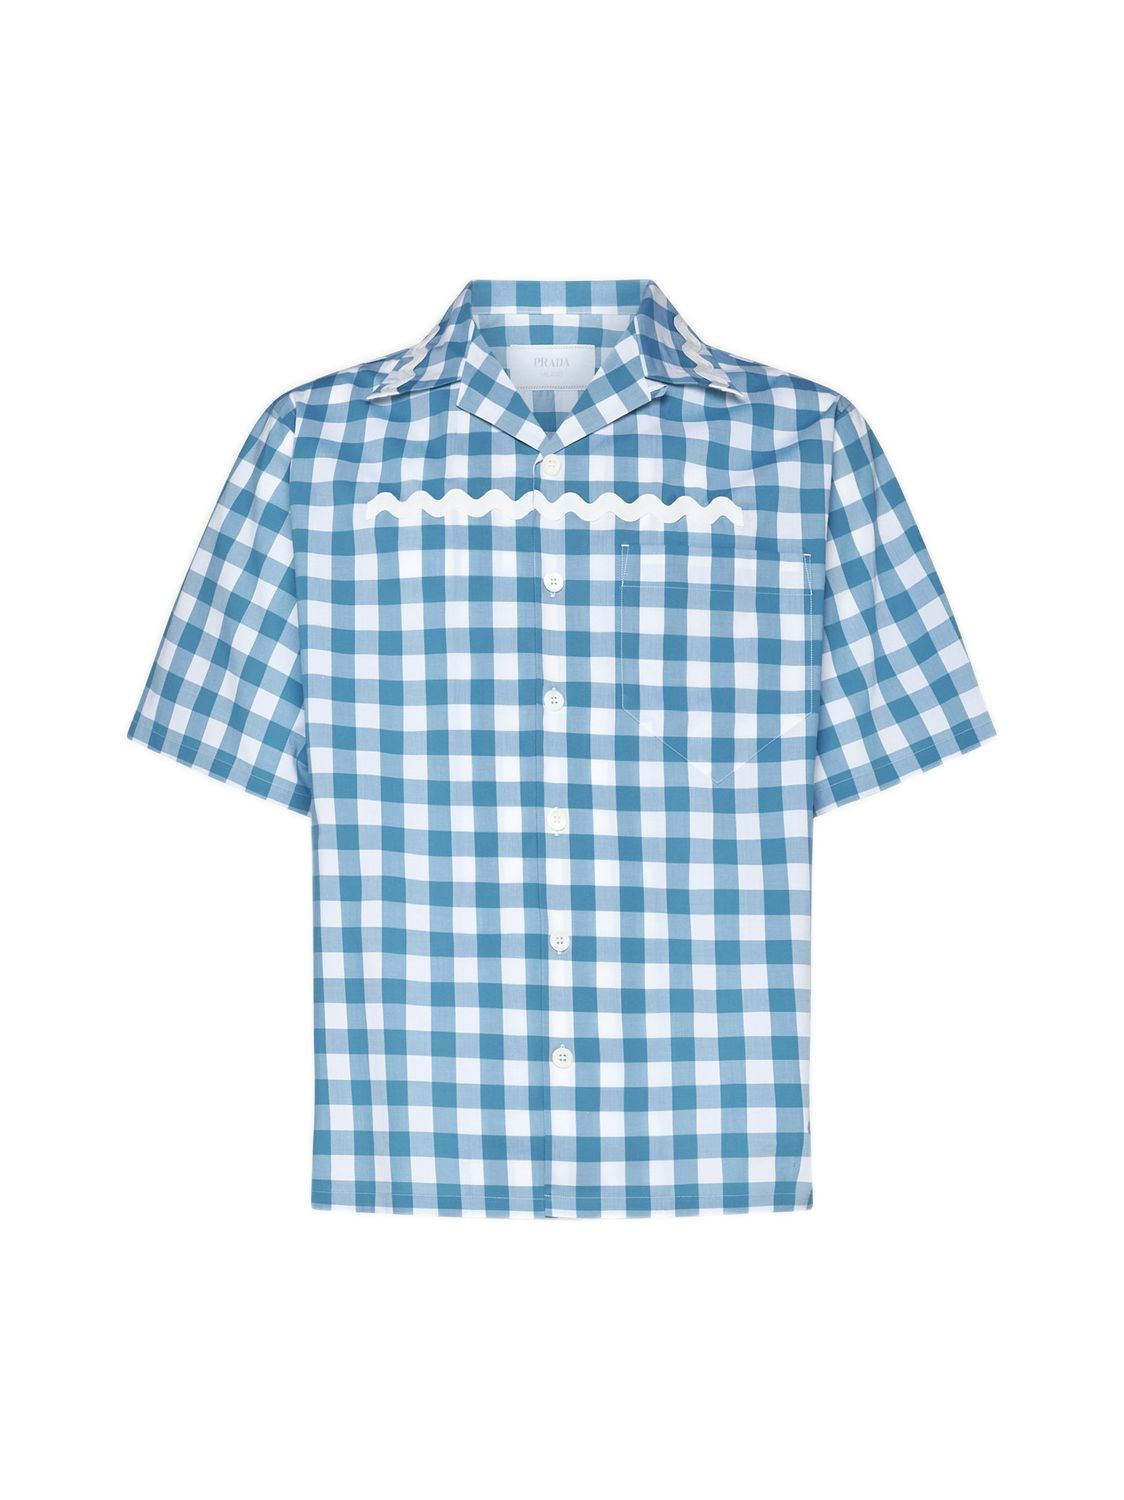 PRADA Classic Vichy Check Men's Shirt in BiancoTurquoise for SS23